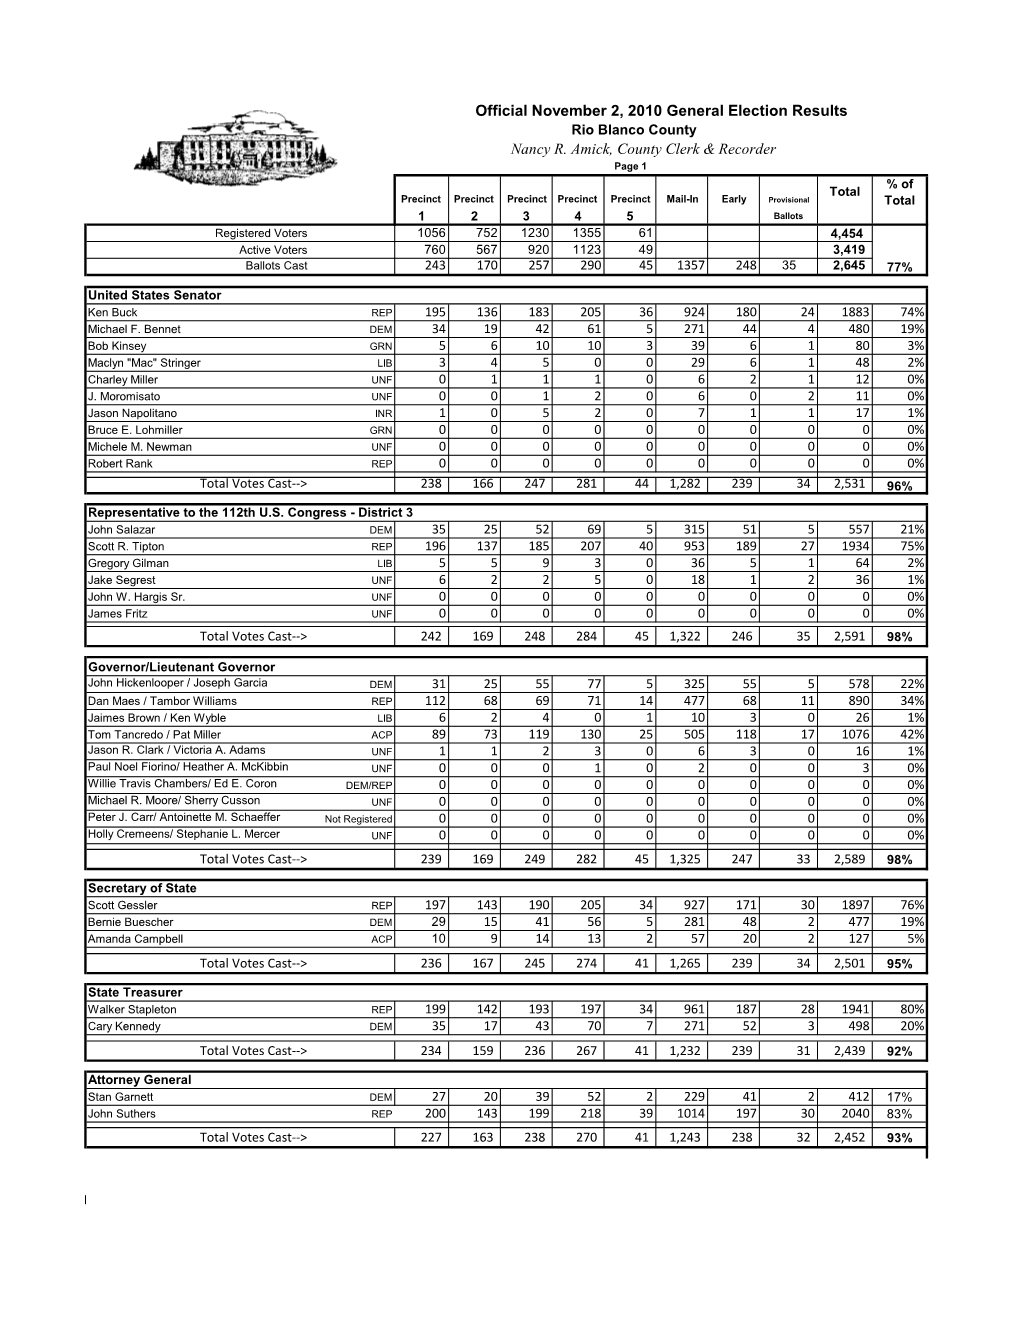 Official 2010 Rio Blanco County General Election Results